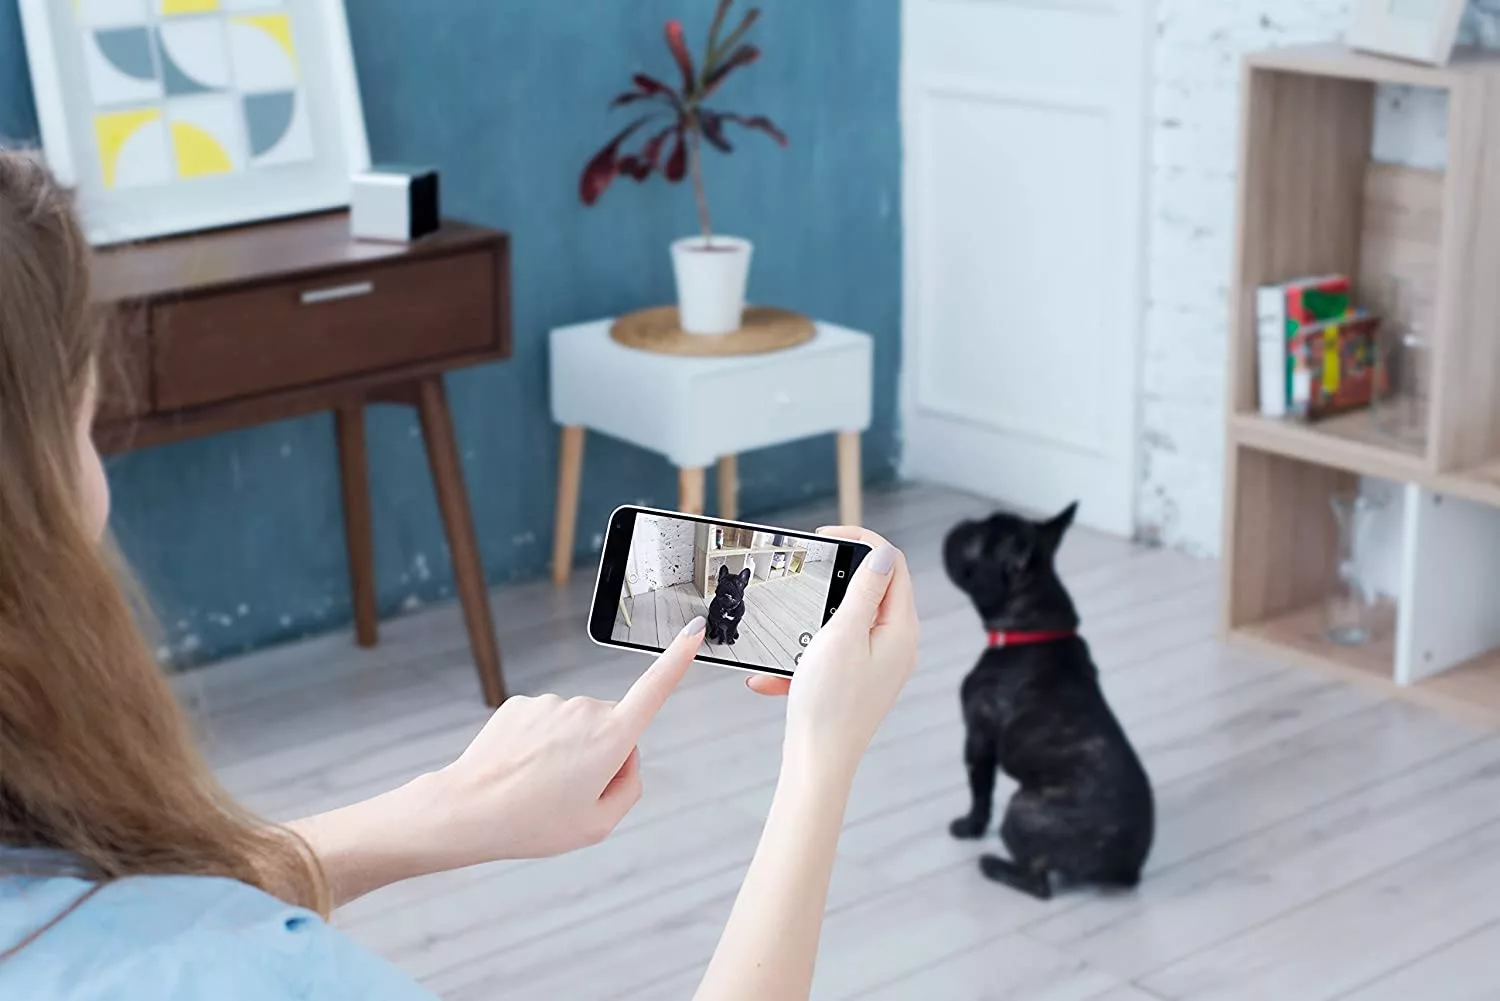 Watching a dog on a phone using the PetCube Home Camera